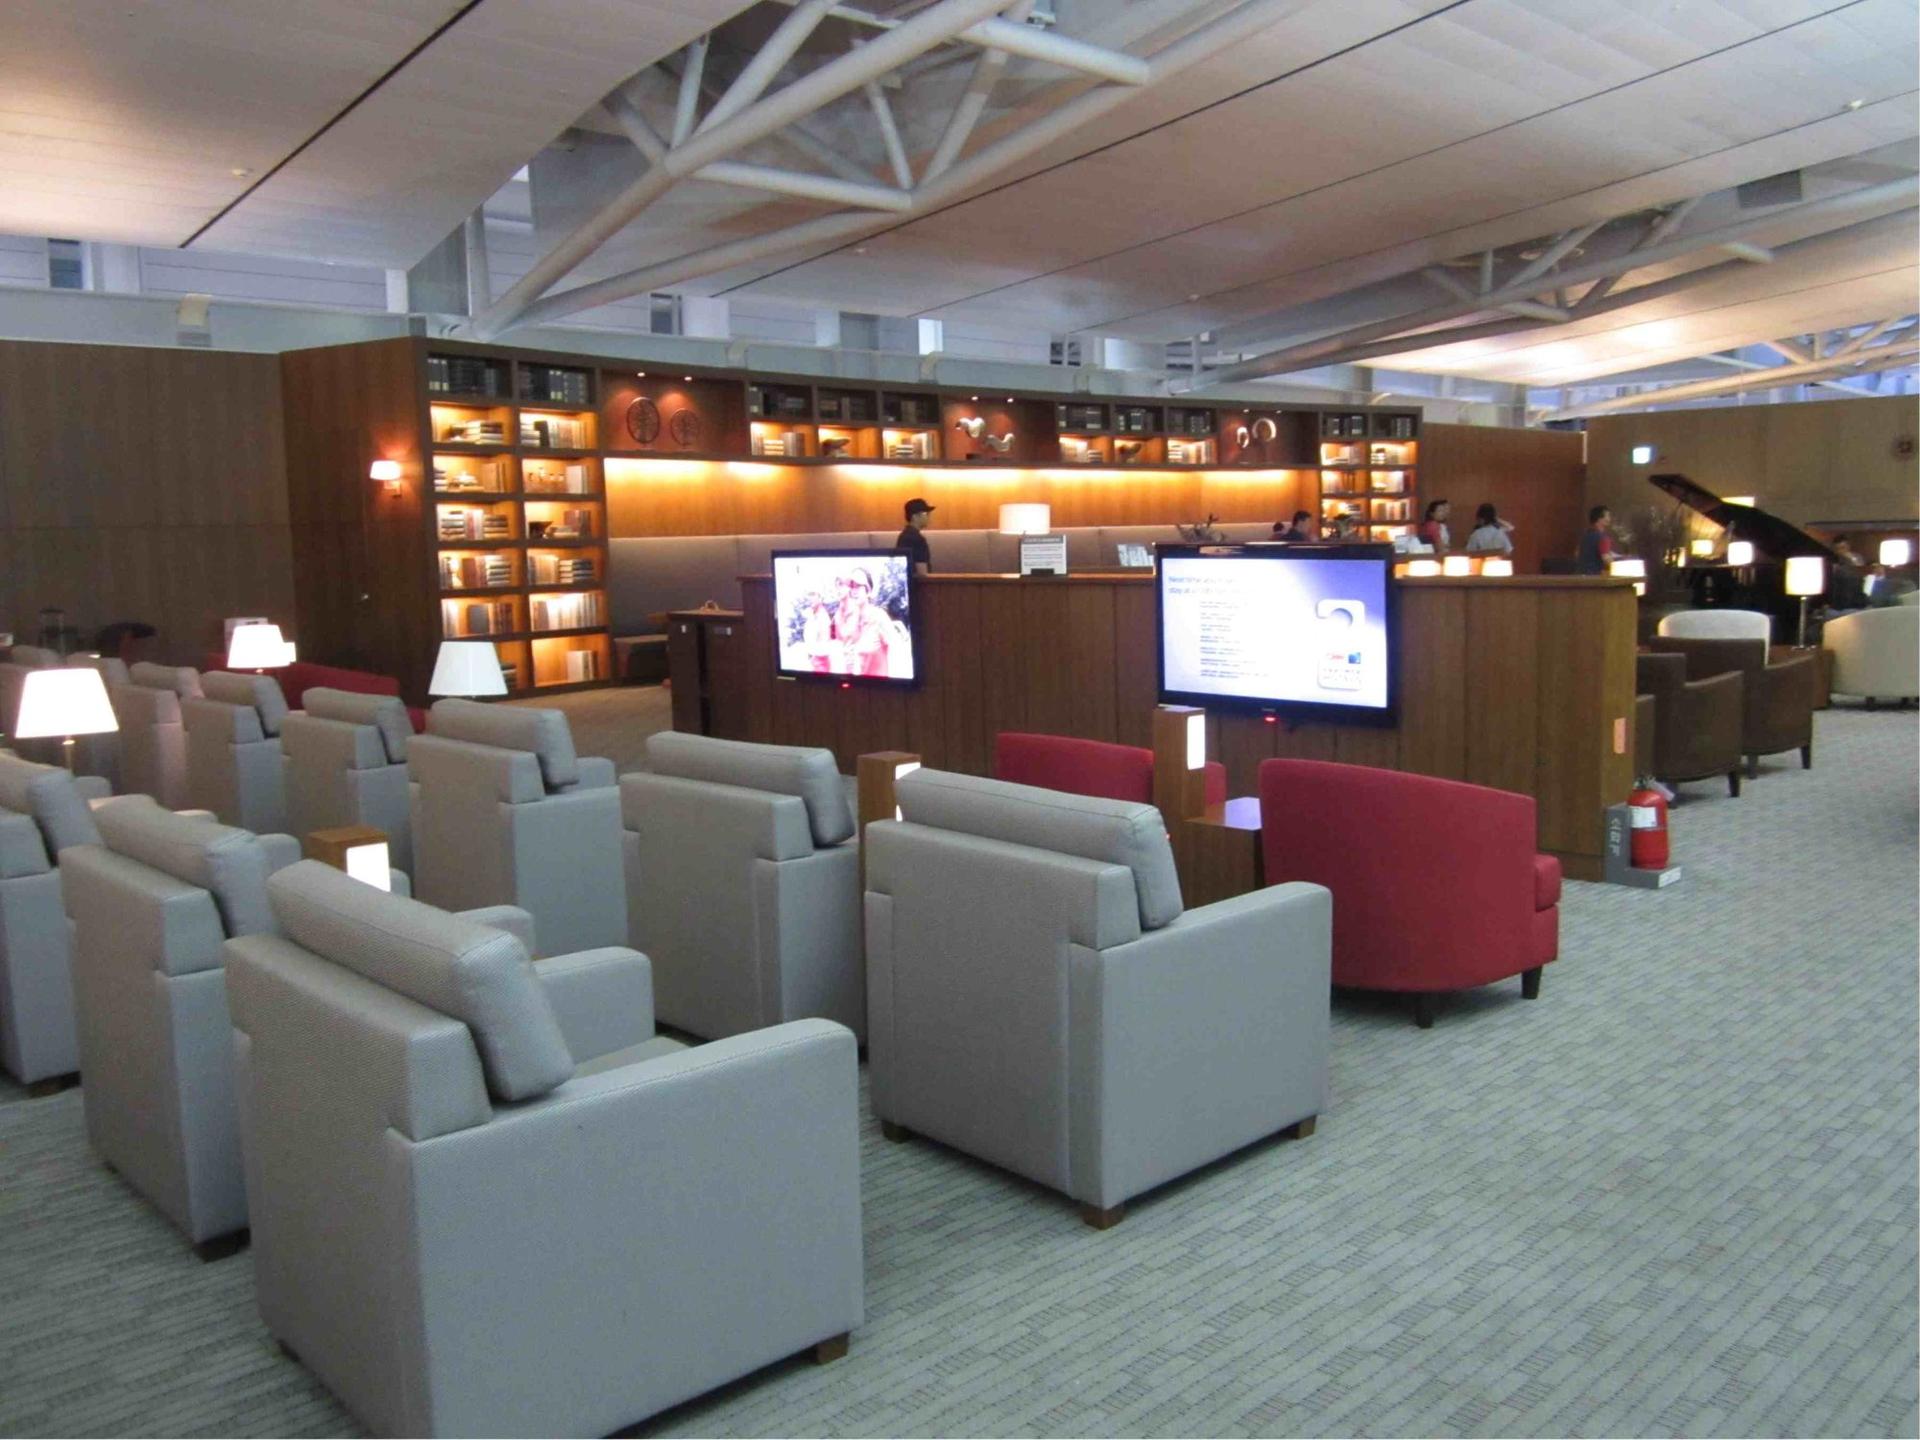 Asiana Airlines Business Class Lounge (East) image 15 of 59